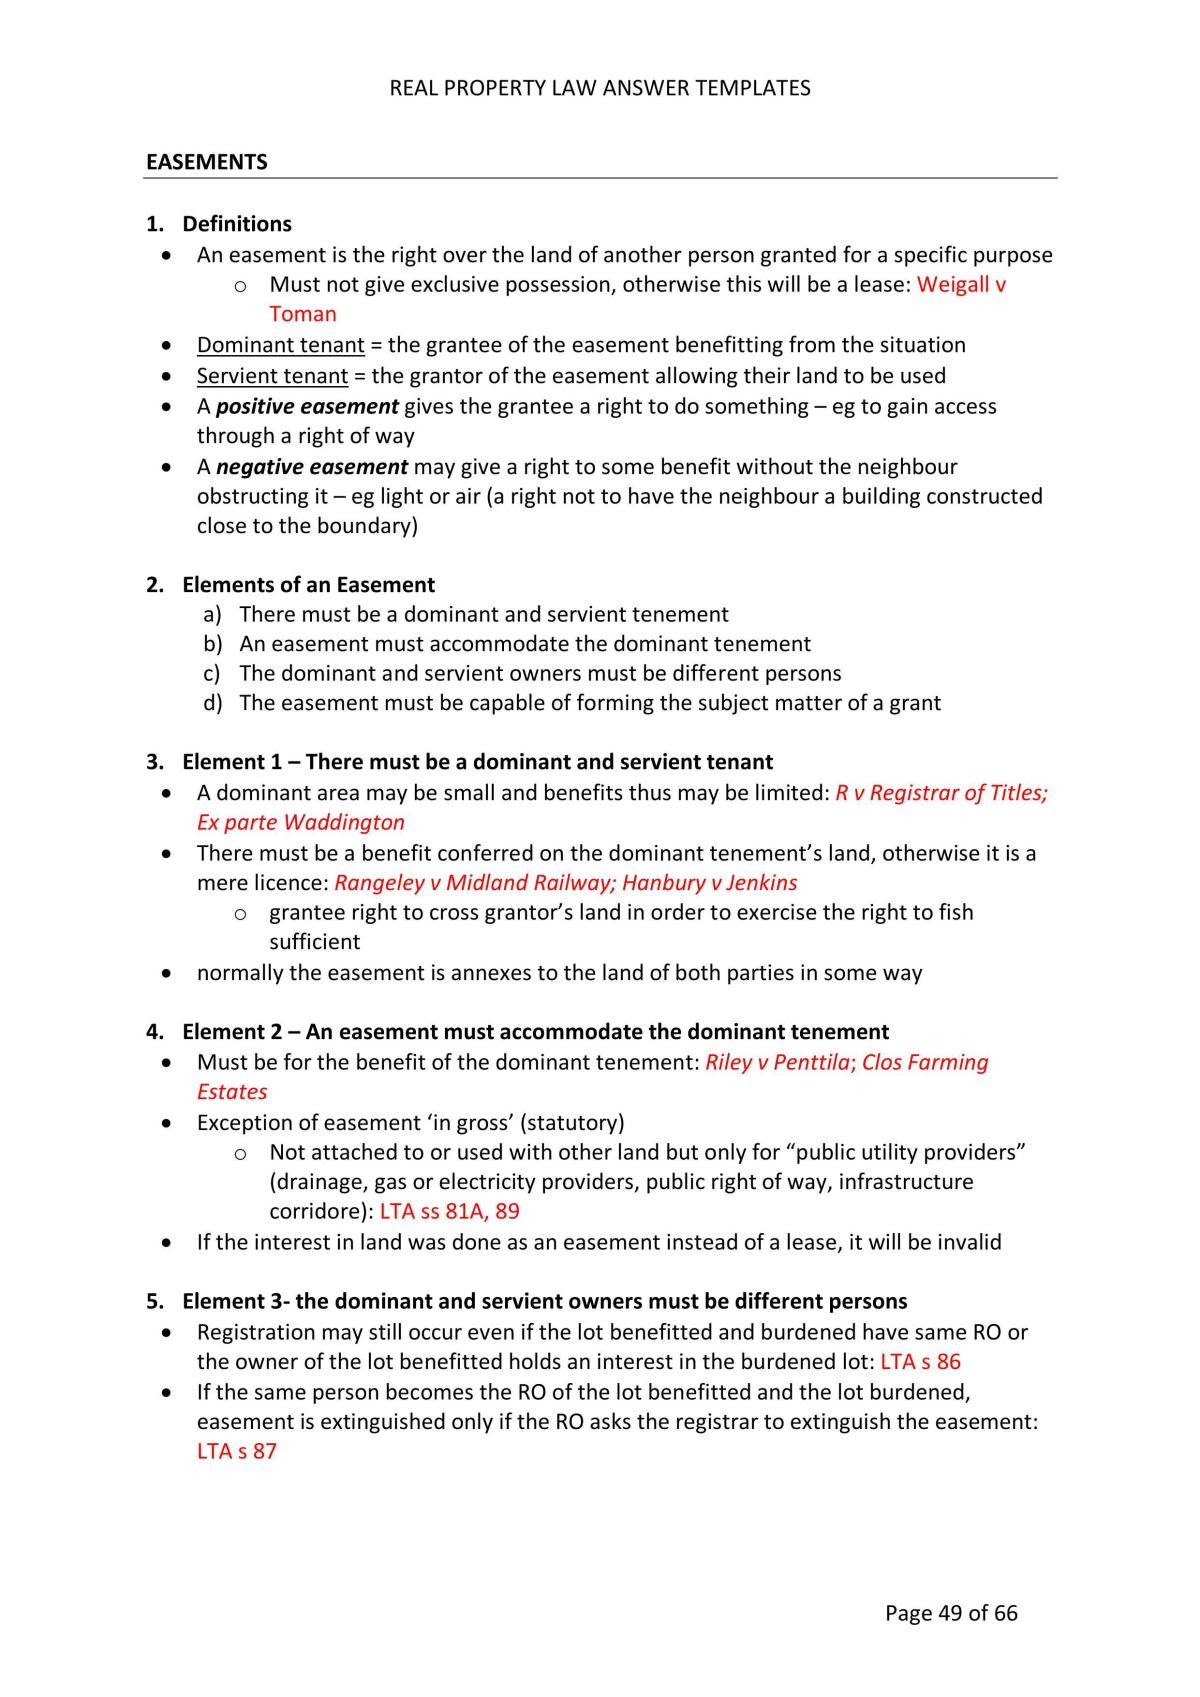 Real Property Law Notes - Page 49